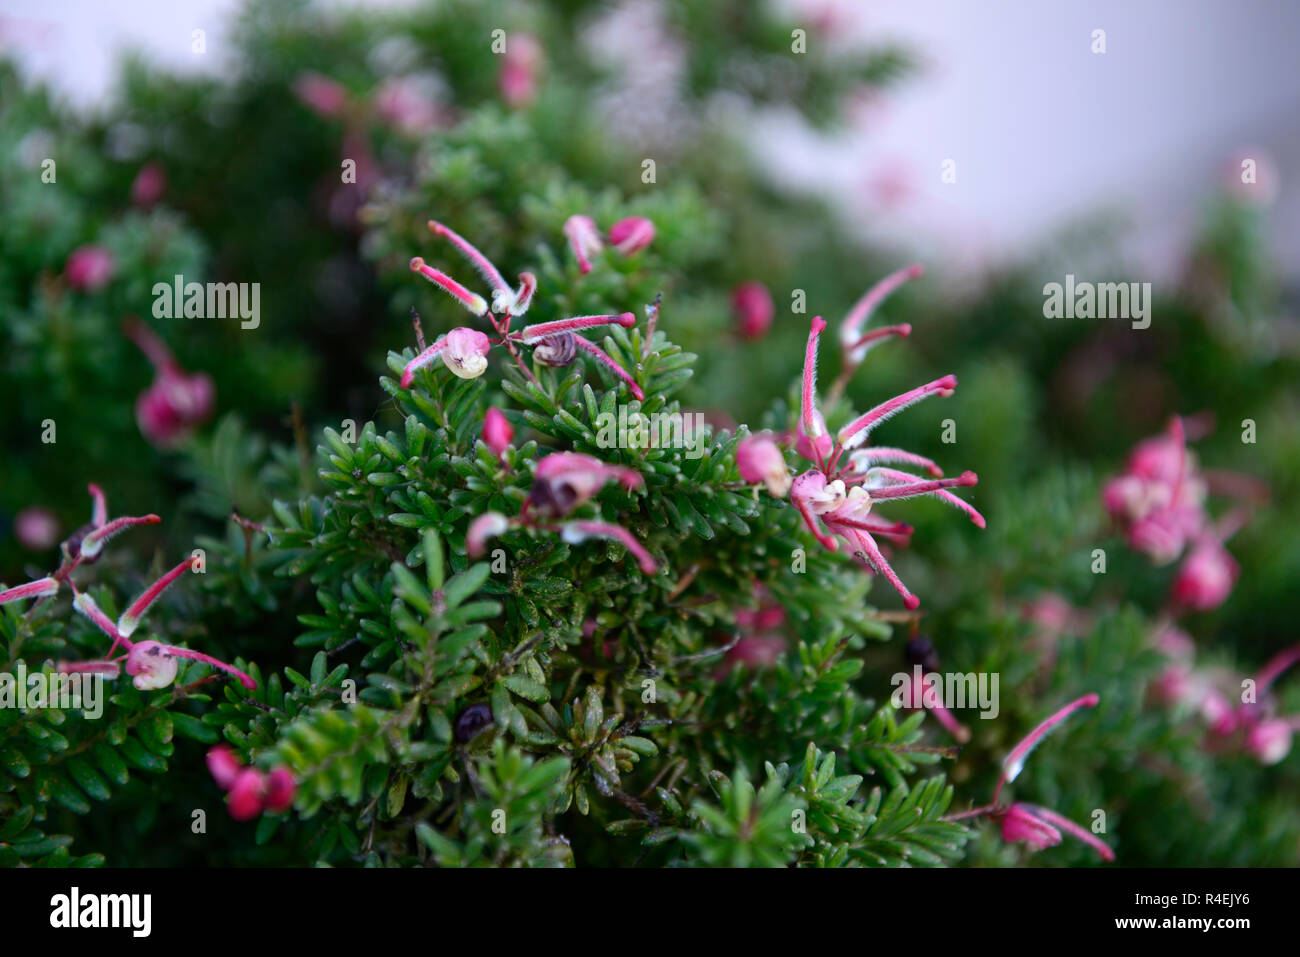 Grevillea lanigera prostrate,Dwarf Woolly Grevillea,evergreen,hardy groundcover,grey-green foliage,woolly,pink,flowers,flowering,garden,RM floral Stock Photo